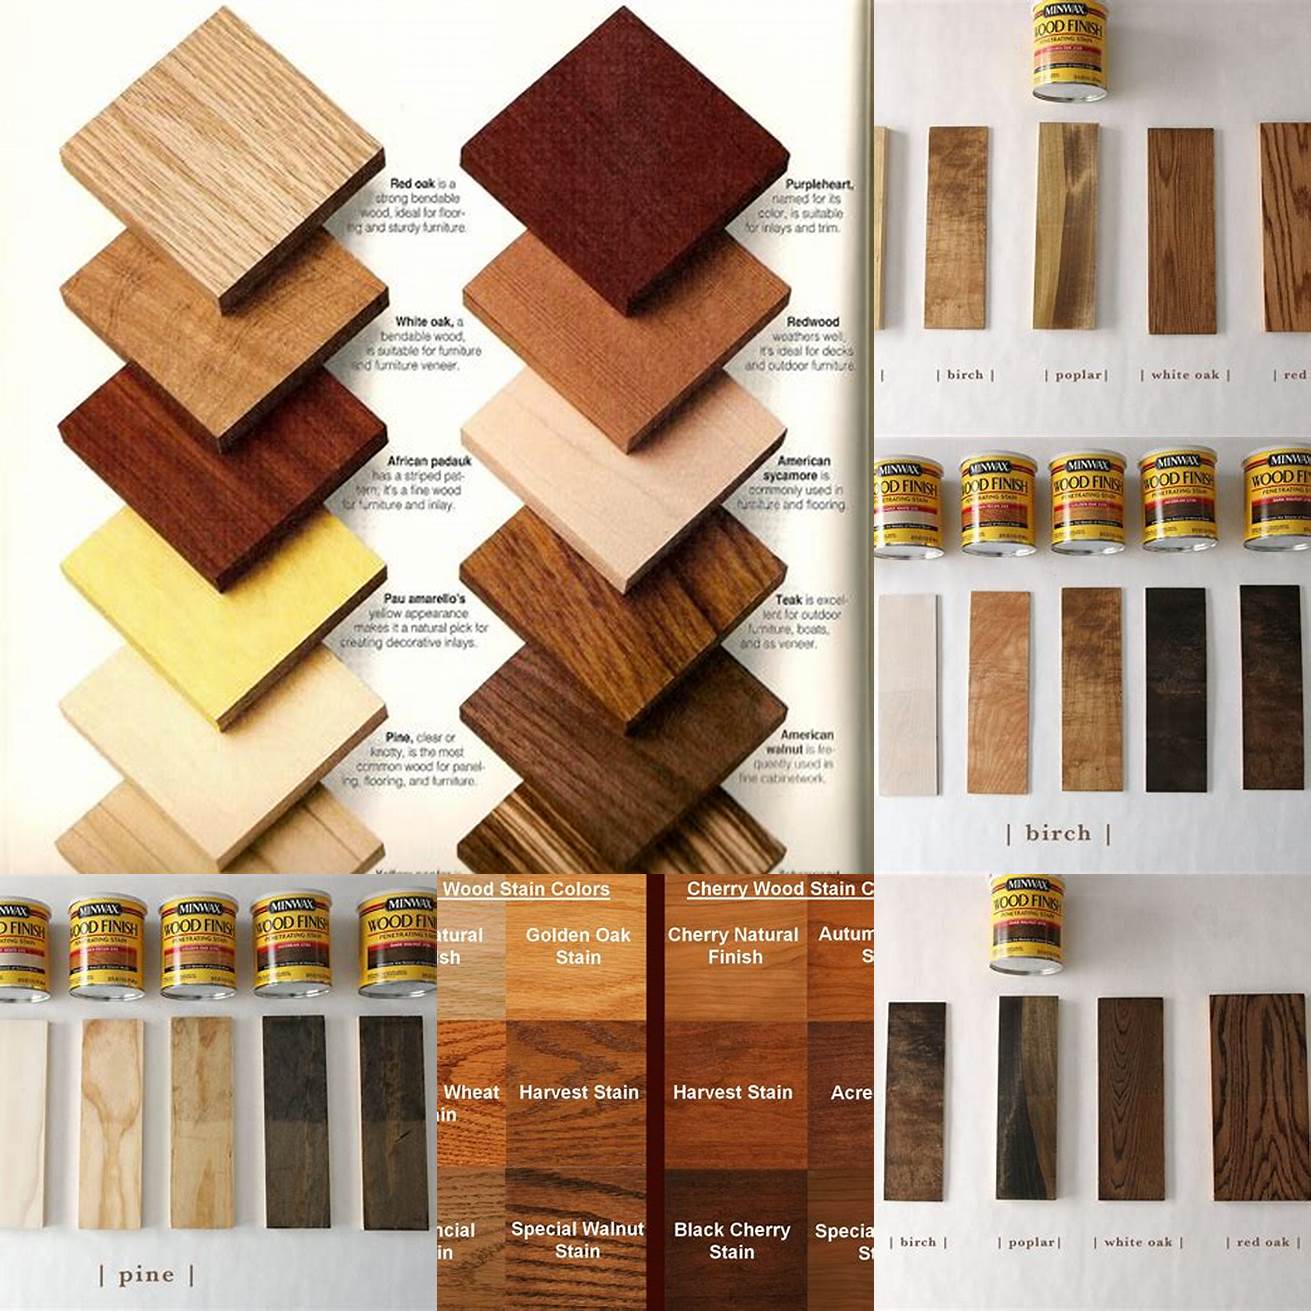 Staining Other Types of Wood